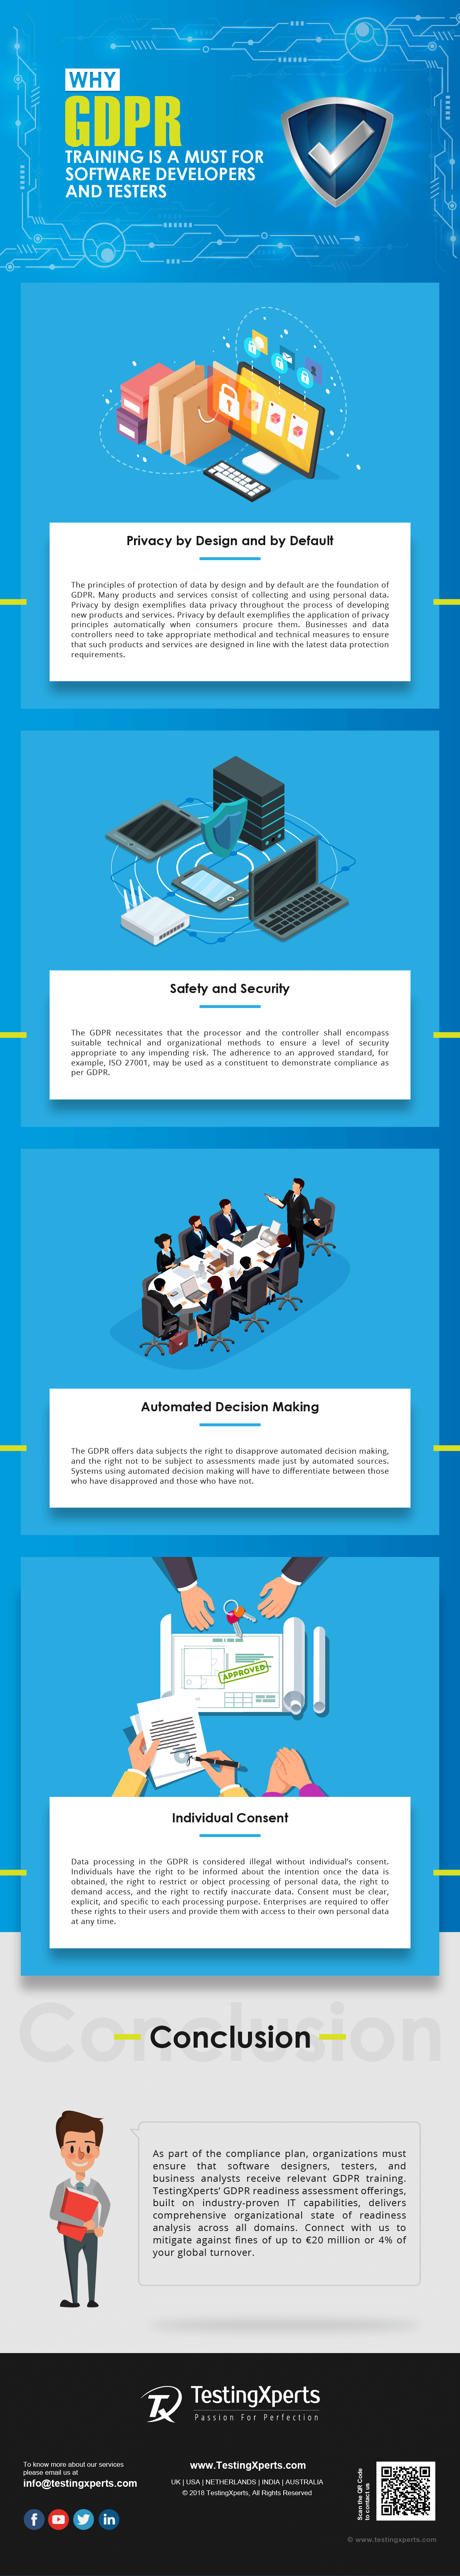 why-we-need-gdpr-training-infographic